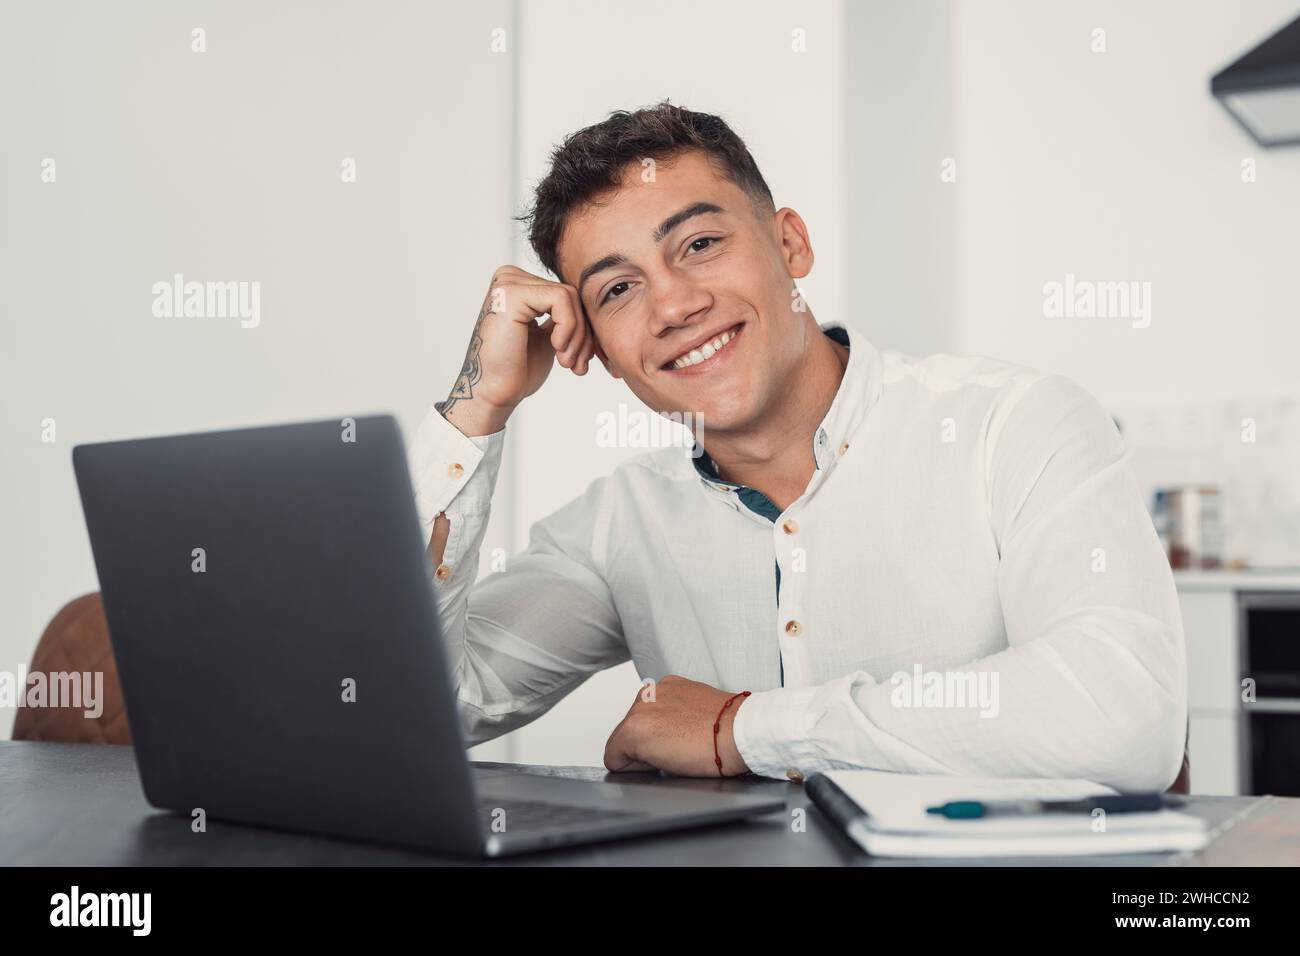 Good-looking millennial office employee in glasses sitting at desk in front of laptop smiling looking at camera. Successful worker, career advance and opportunity, owner of prosperous business concept Stock Photo